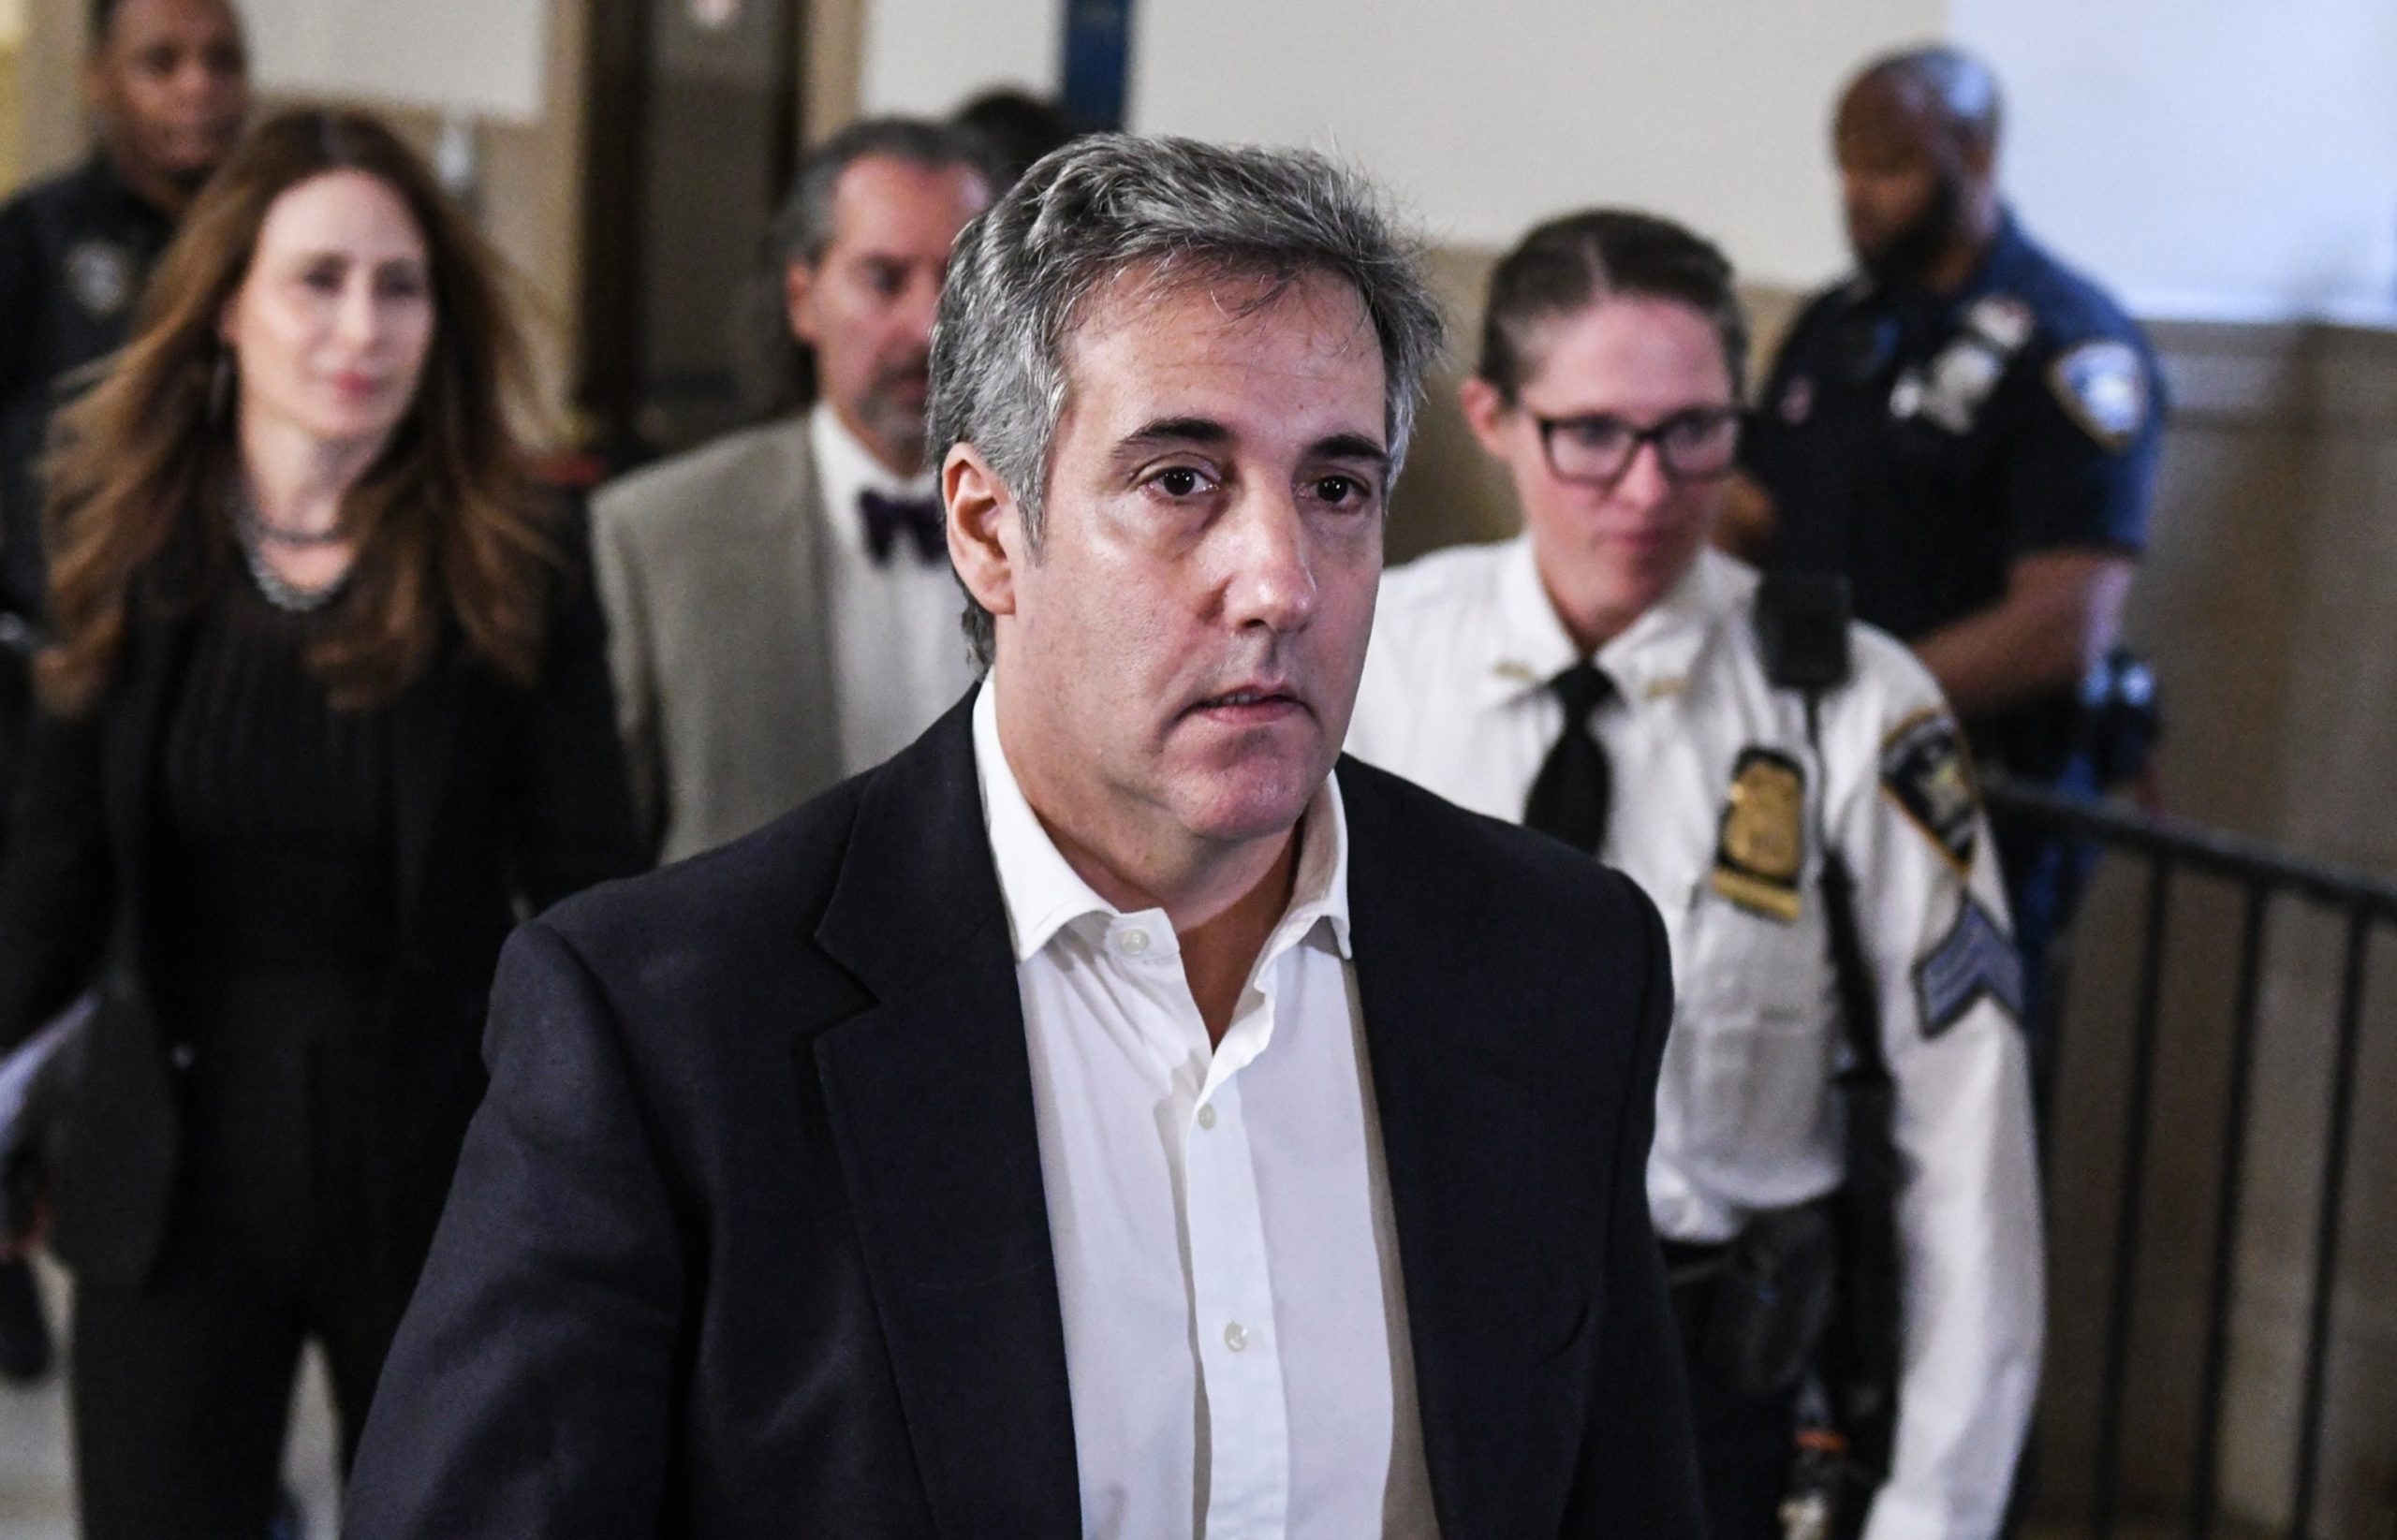 Michael Cohen acknowledges that fabricated lawsuits in his attempt for early release were generated by a Google AI program